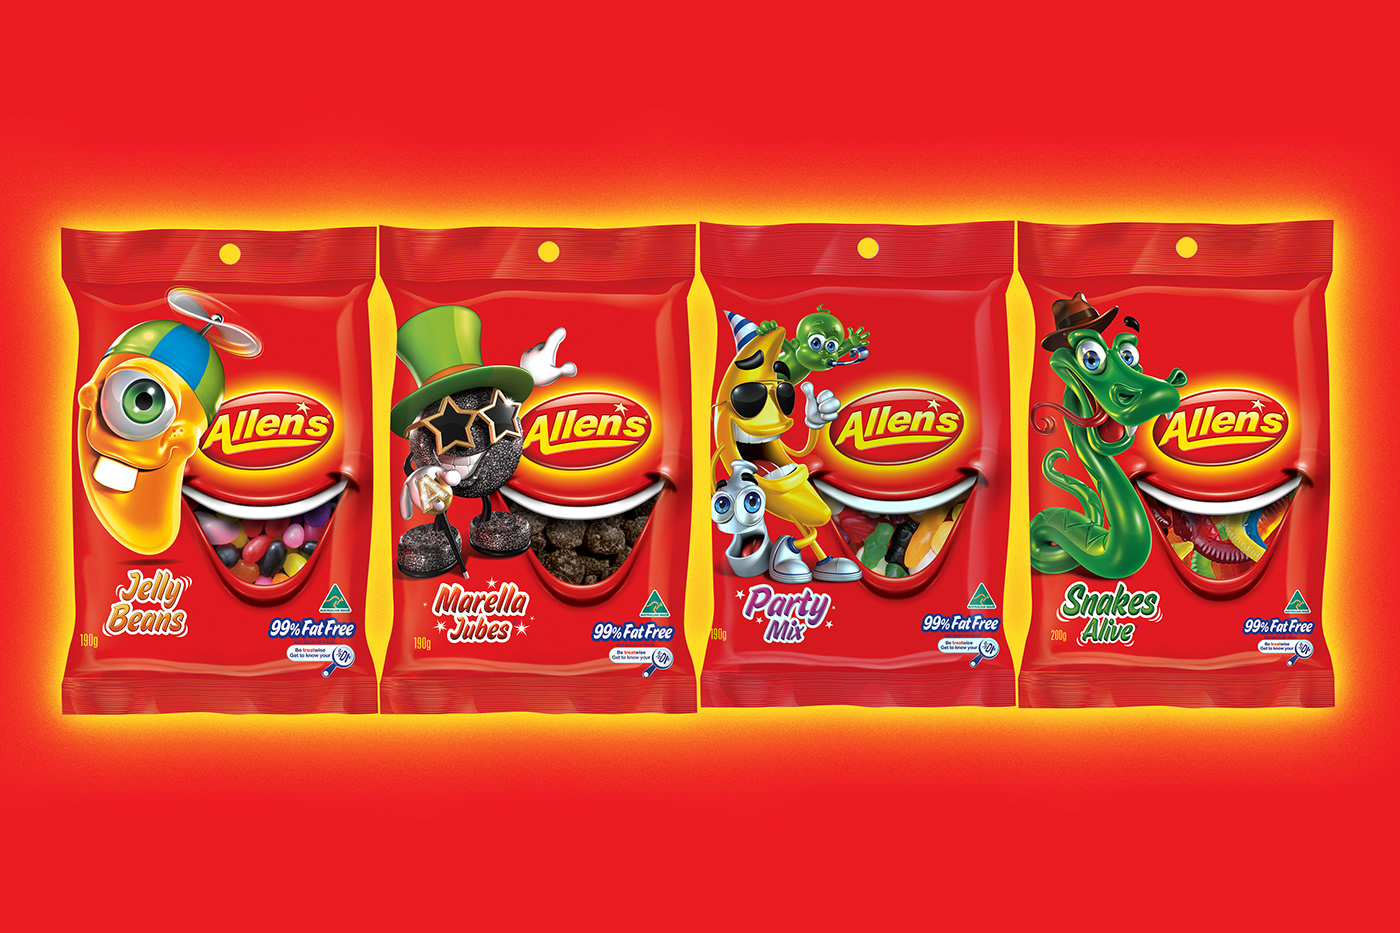 2008 Allen’s ‘Smile’ packaging design: Jelly Beans, Marella Jubes, Party Mix and Snakes Alive. 